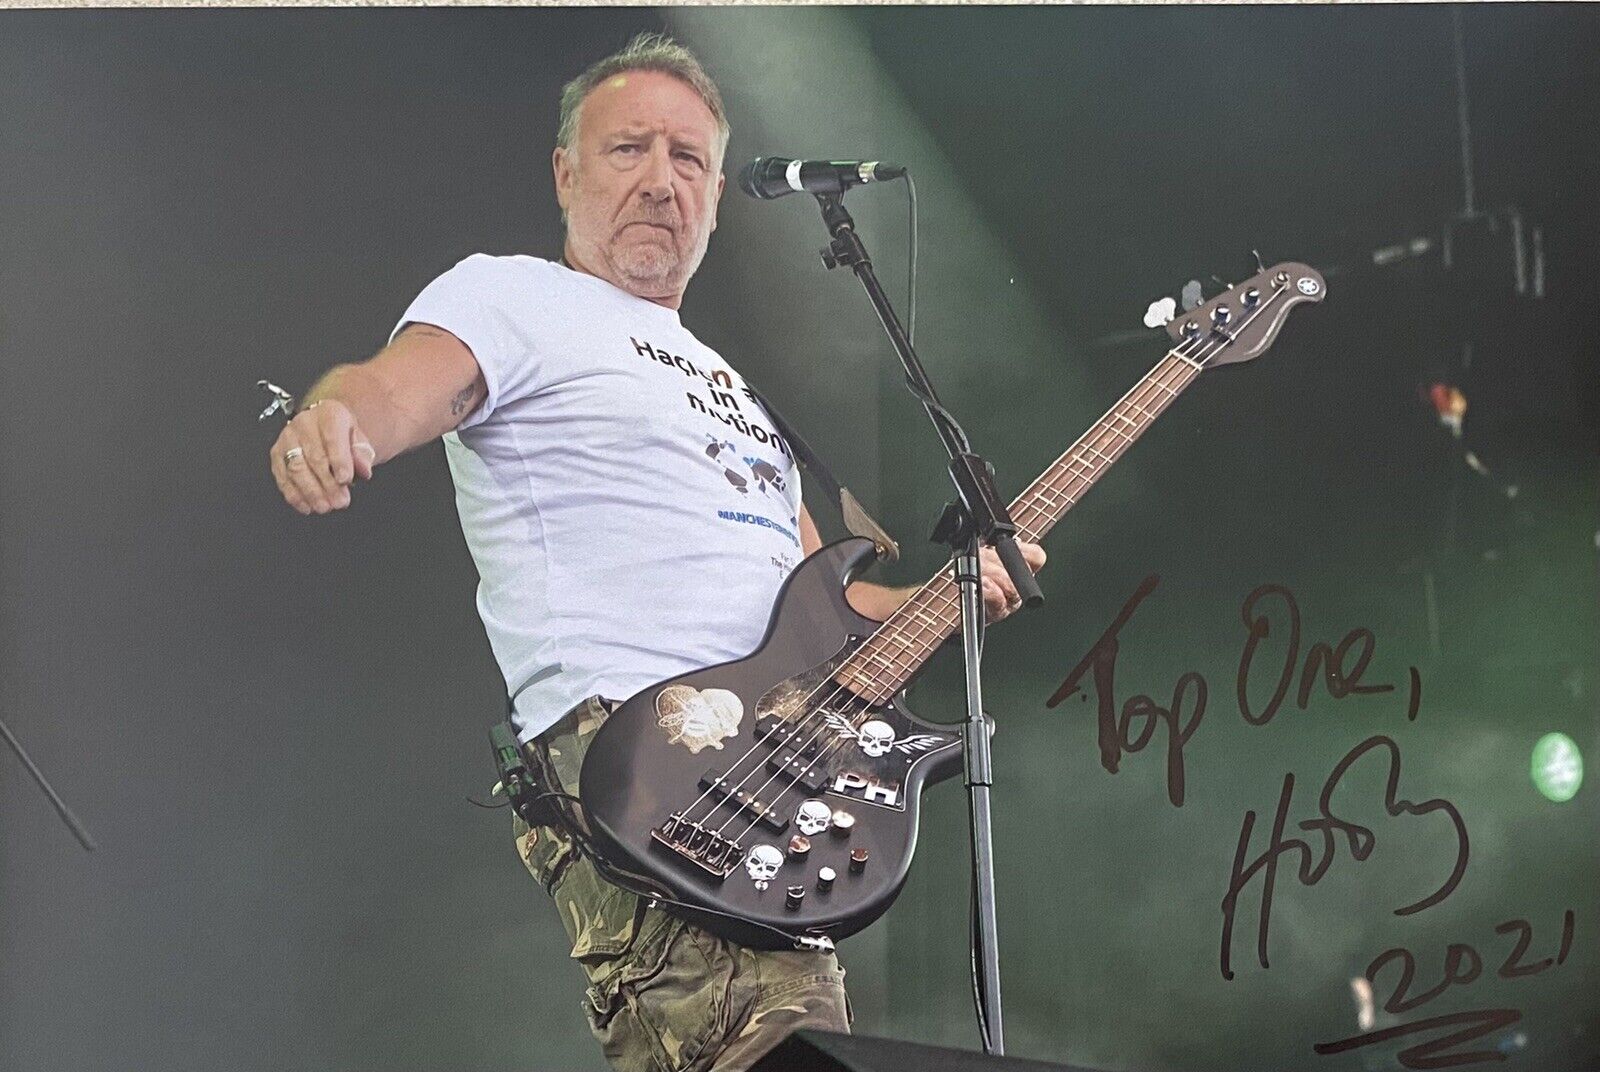 Peter Hook Genuine Hand Signed 12x8 Photo Poster painting, Joy Division, New Order, 1